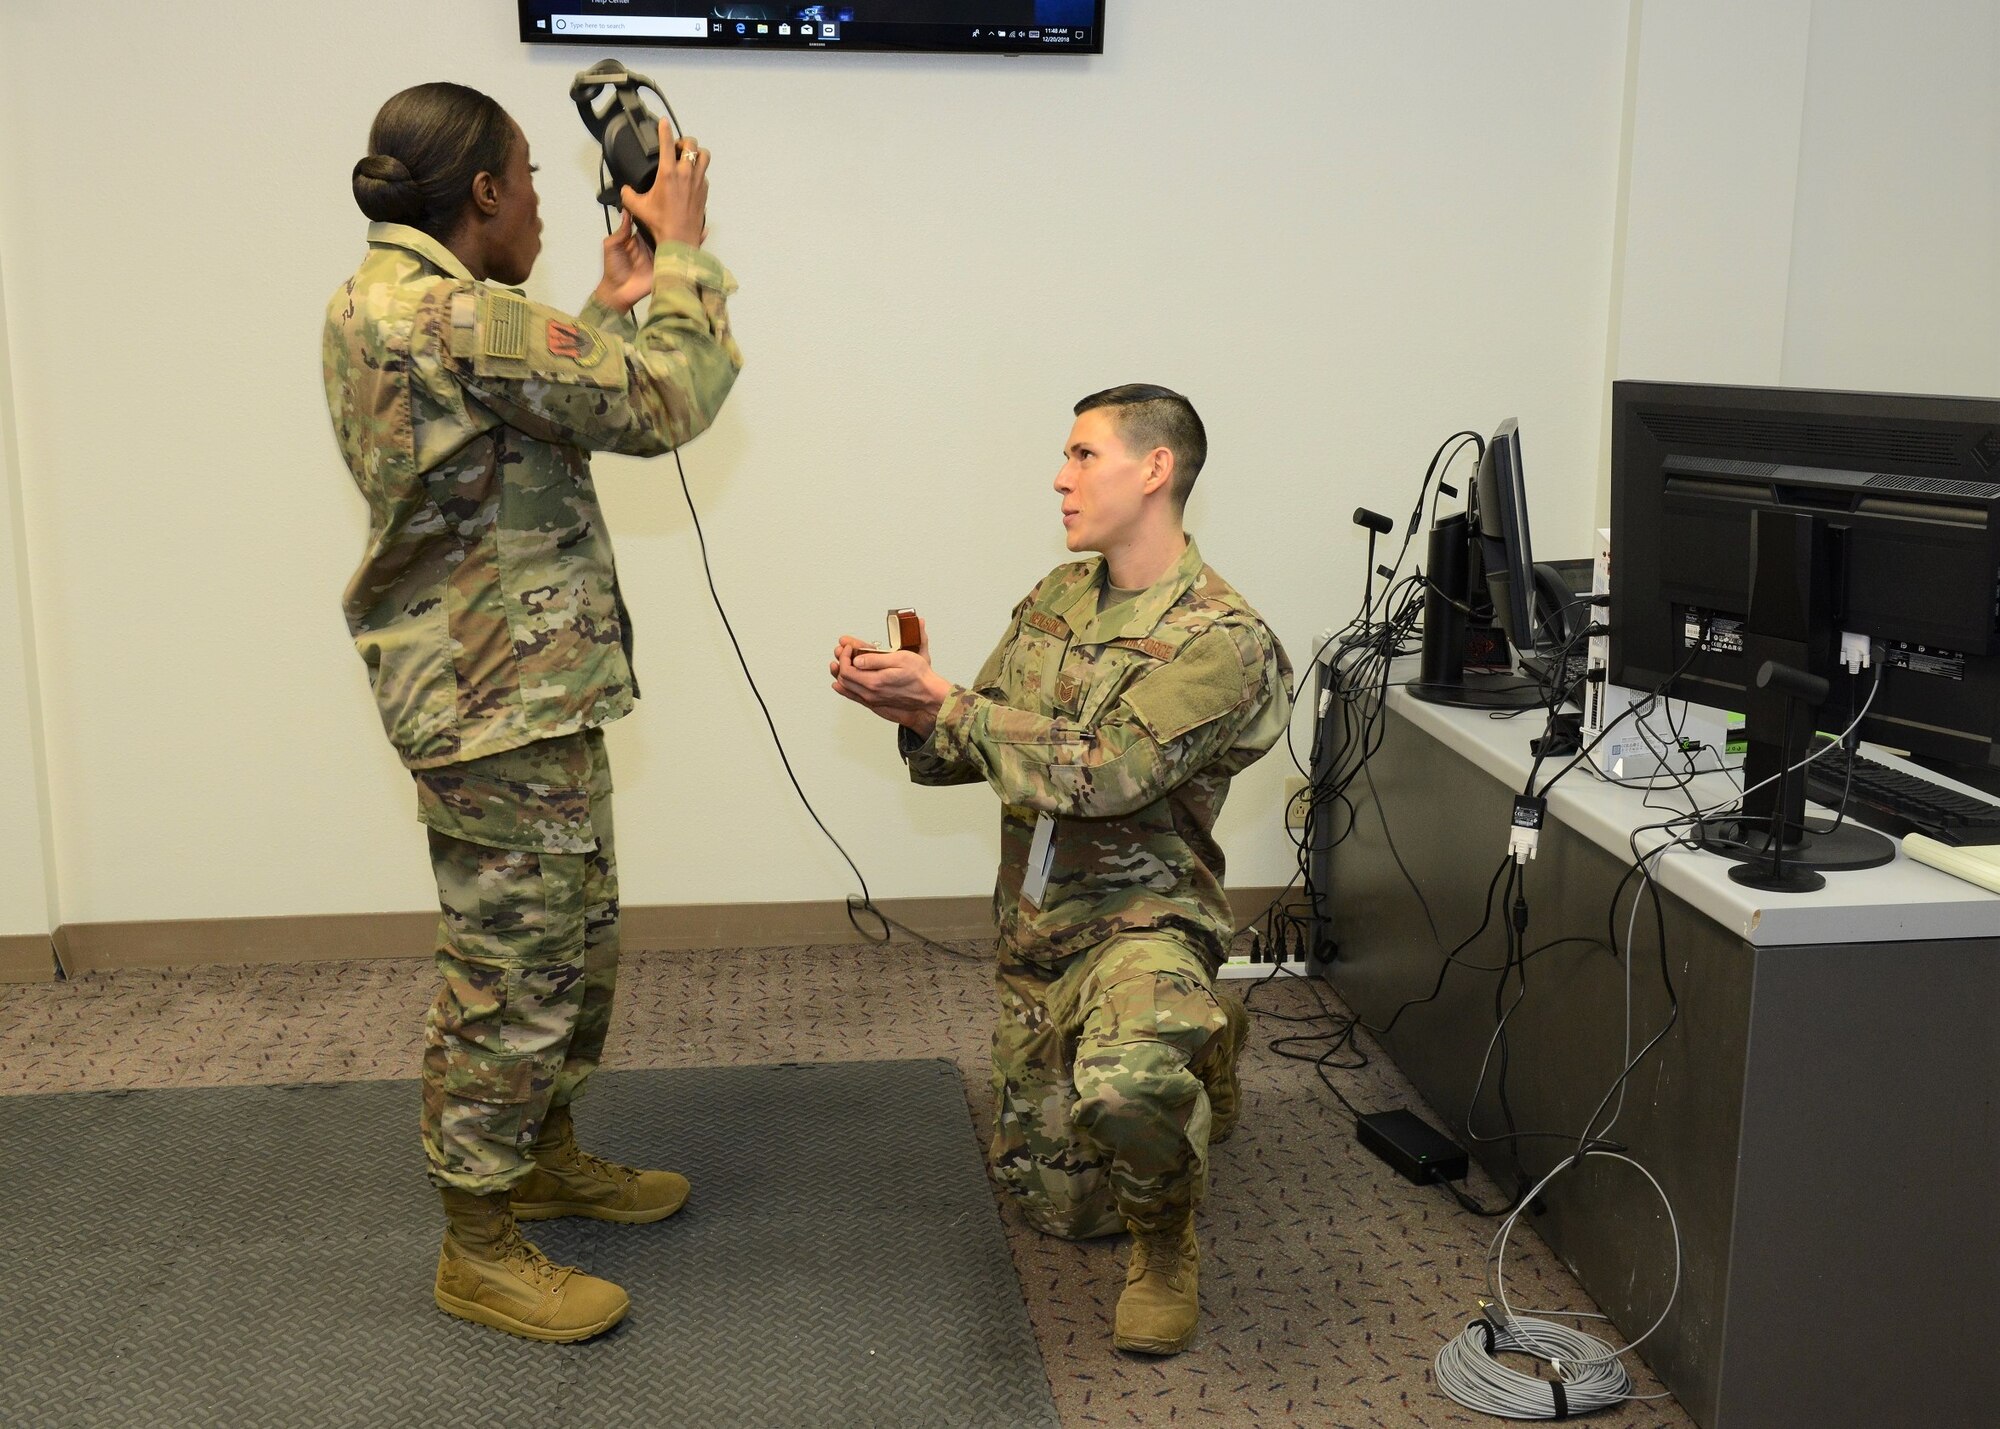 On one knee, Tech. Sgt. Jeremy Neilson, 412th Aircraft Maintenance Squadron, proposes to Staff Sgt. Nori Sannoh following a presentation to base leadership on using virtual reality programs to train F-35 maintenance personnel Dec. 20, 2018. (U.S. Air Force photo by Kenji Thuloweit)